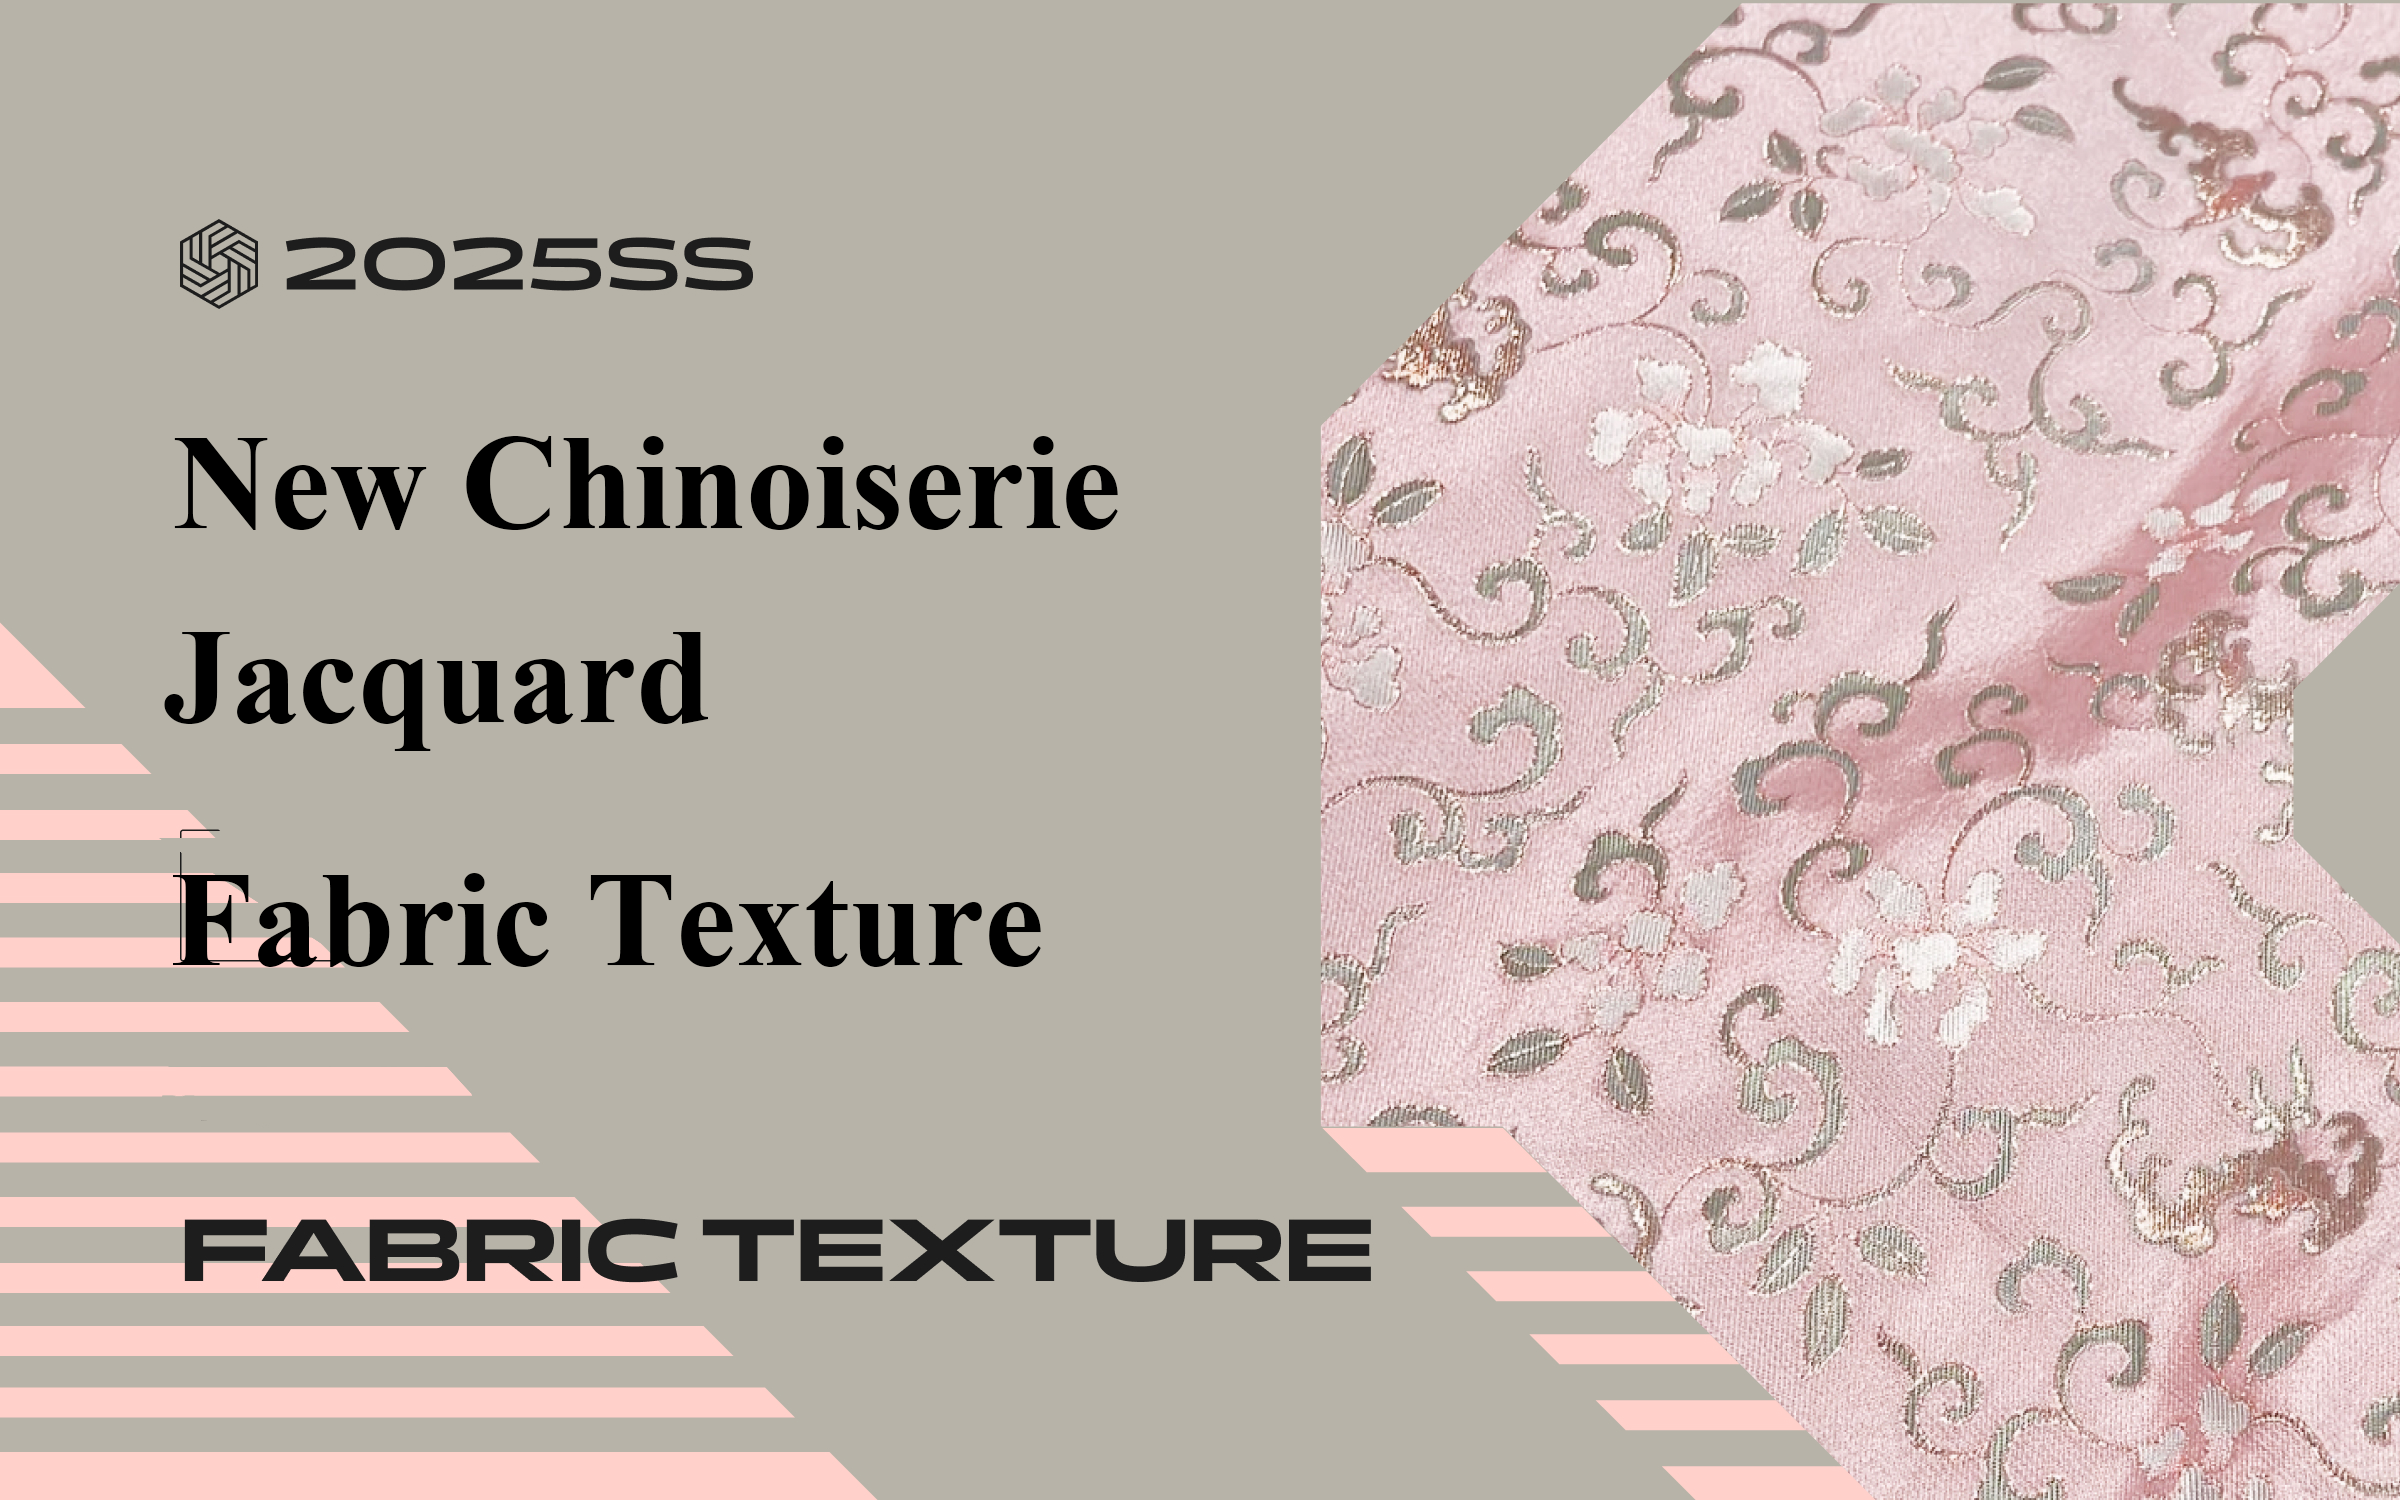 New Chinoiserie -- The Fabric Trend for Women's Jacquard